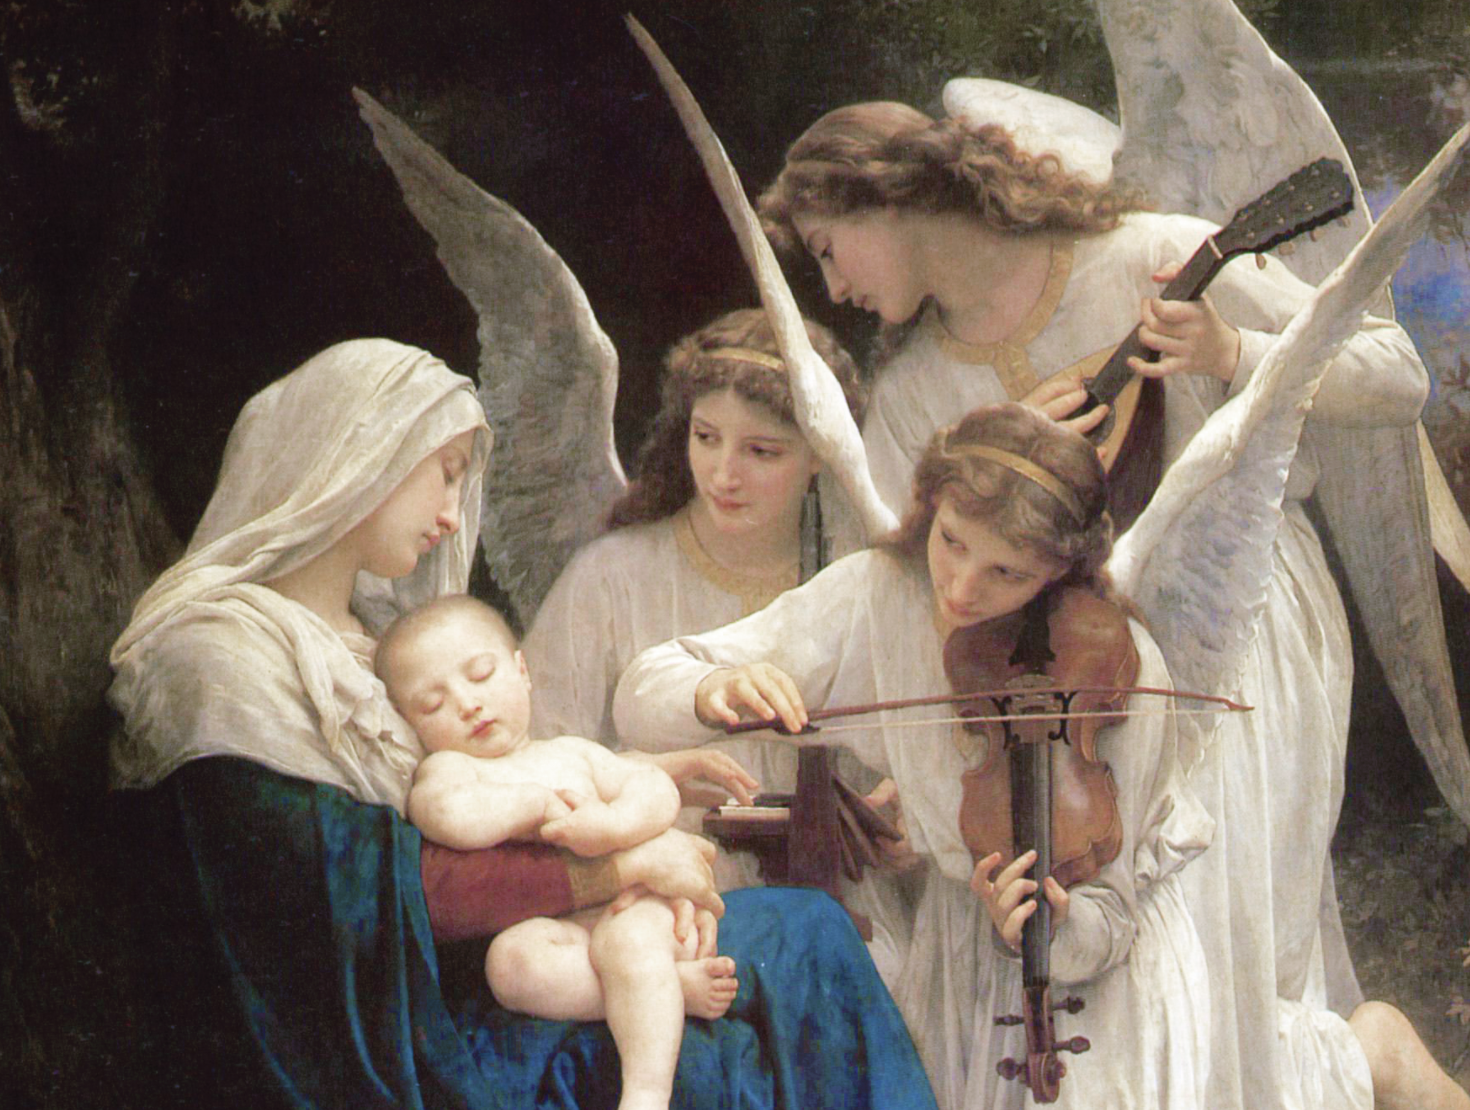 Song of the Angels (1881) by William-Adolphe Bouguereau - Public Domain Catholic Painting